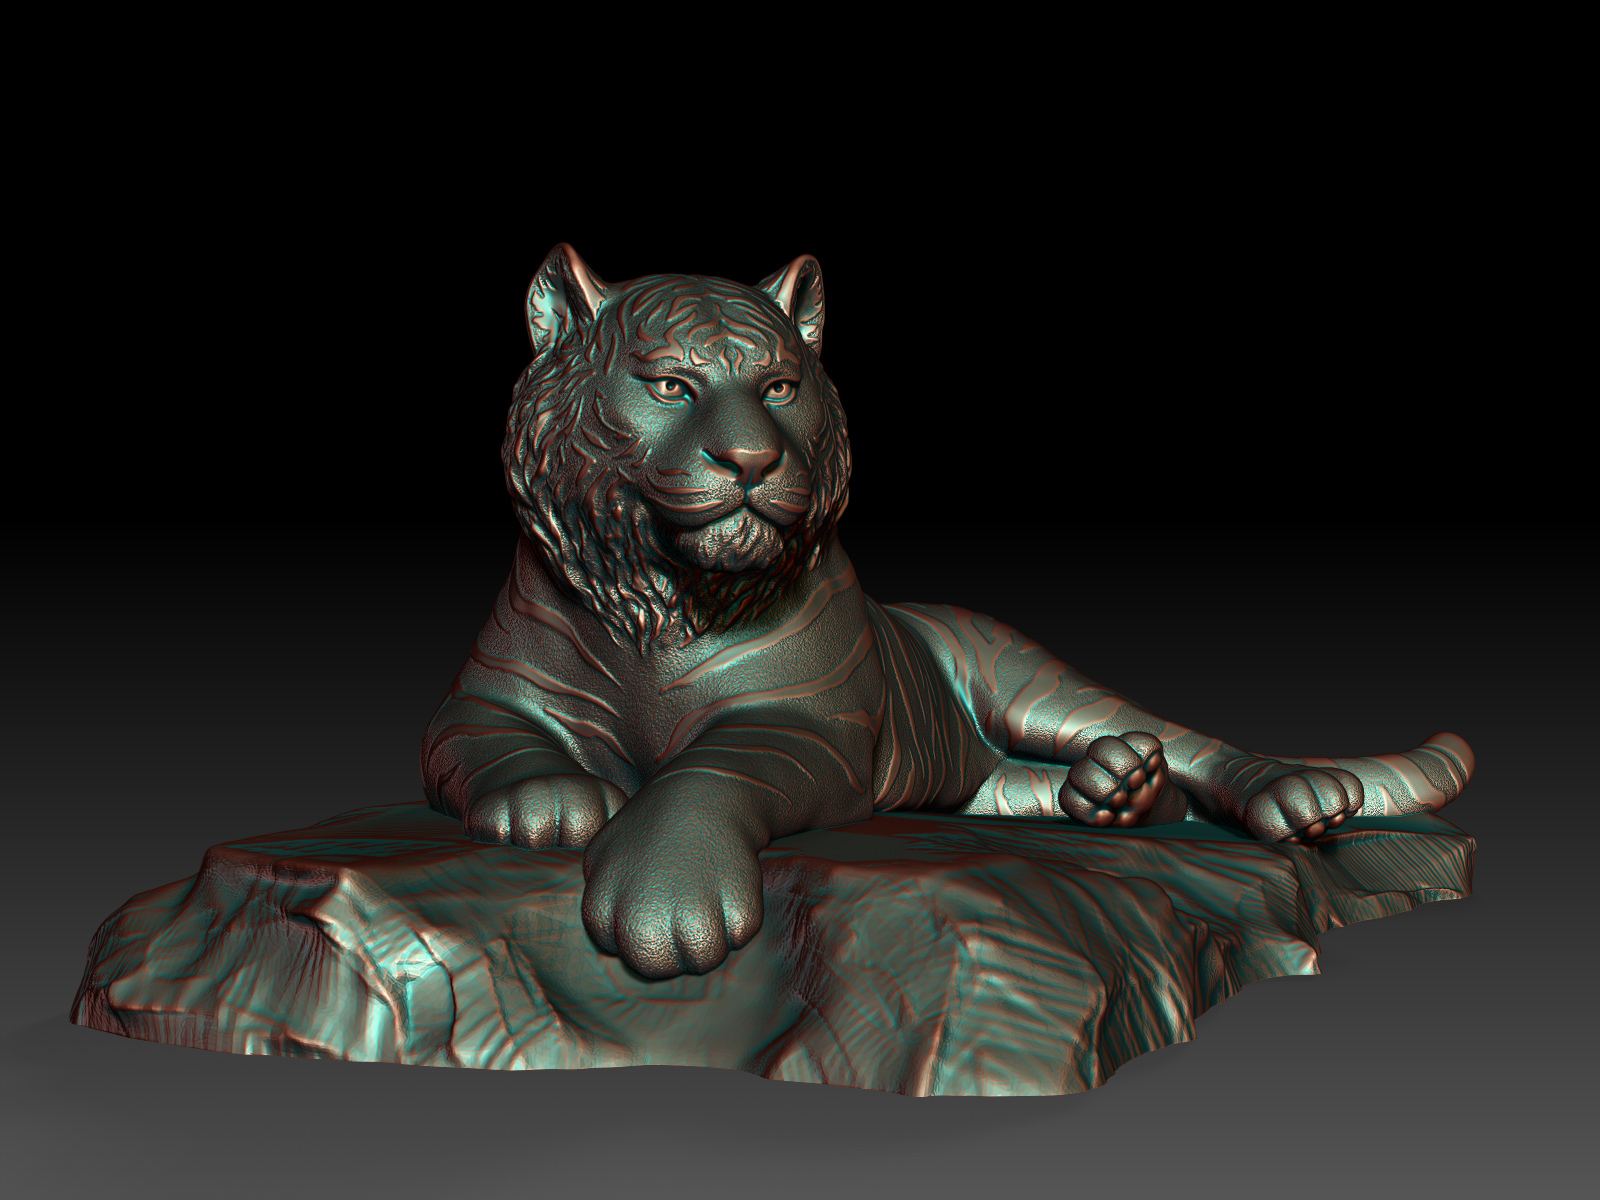 Tiger Digital Sculpture Created for 3D Printing